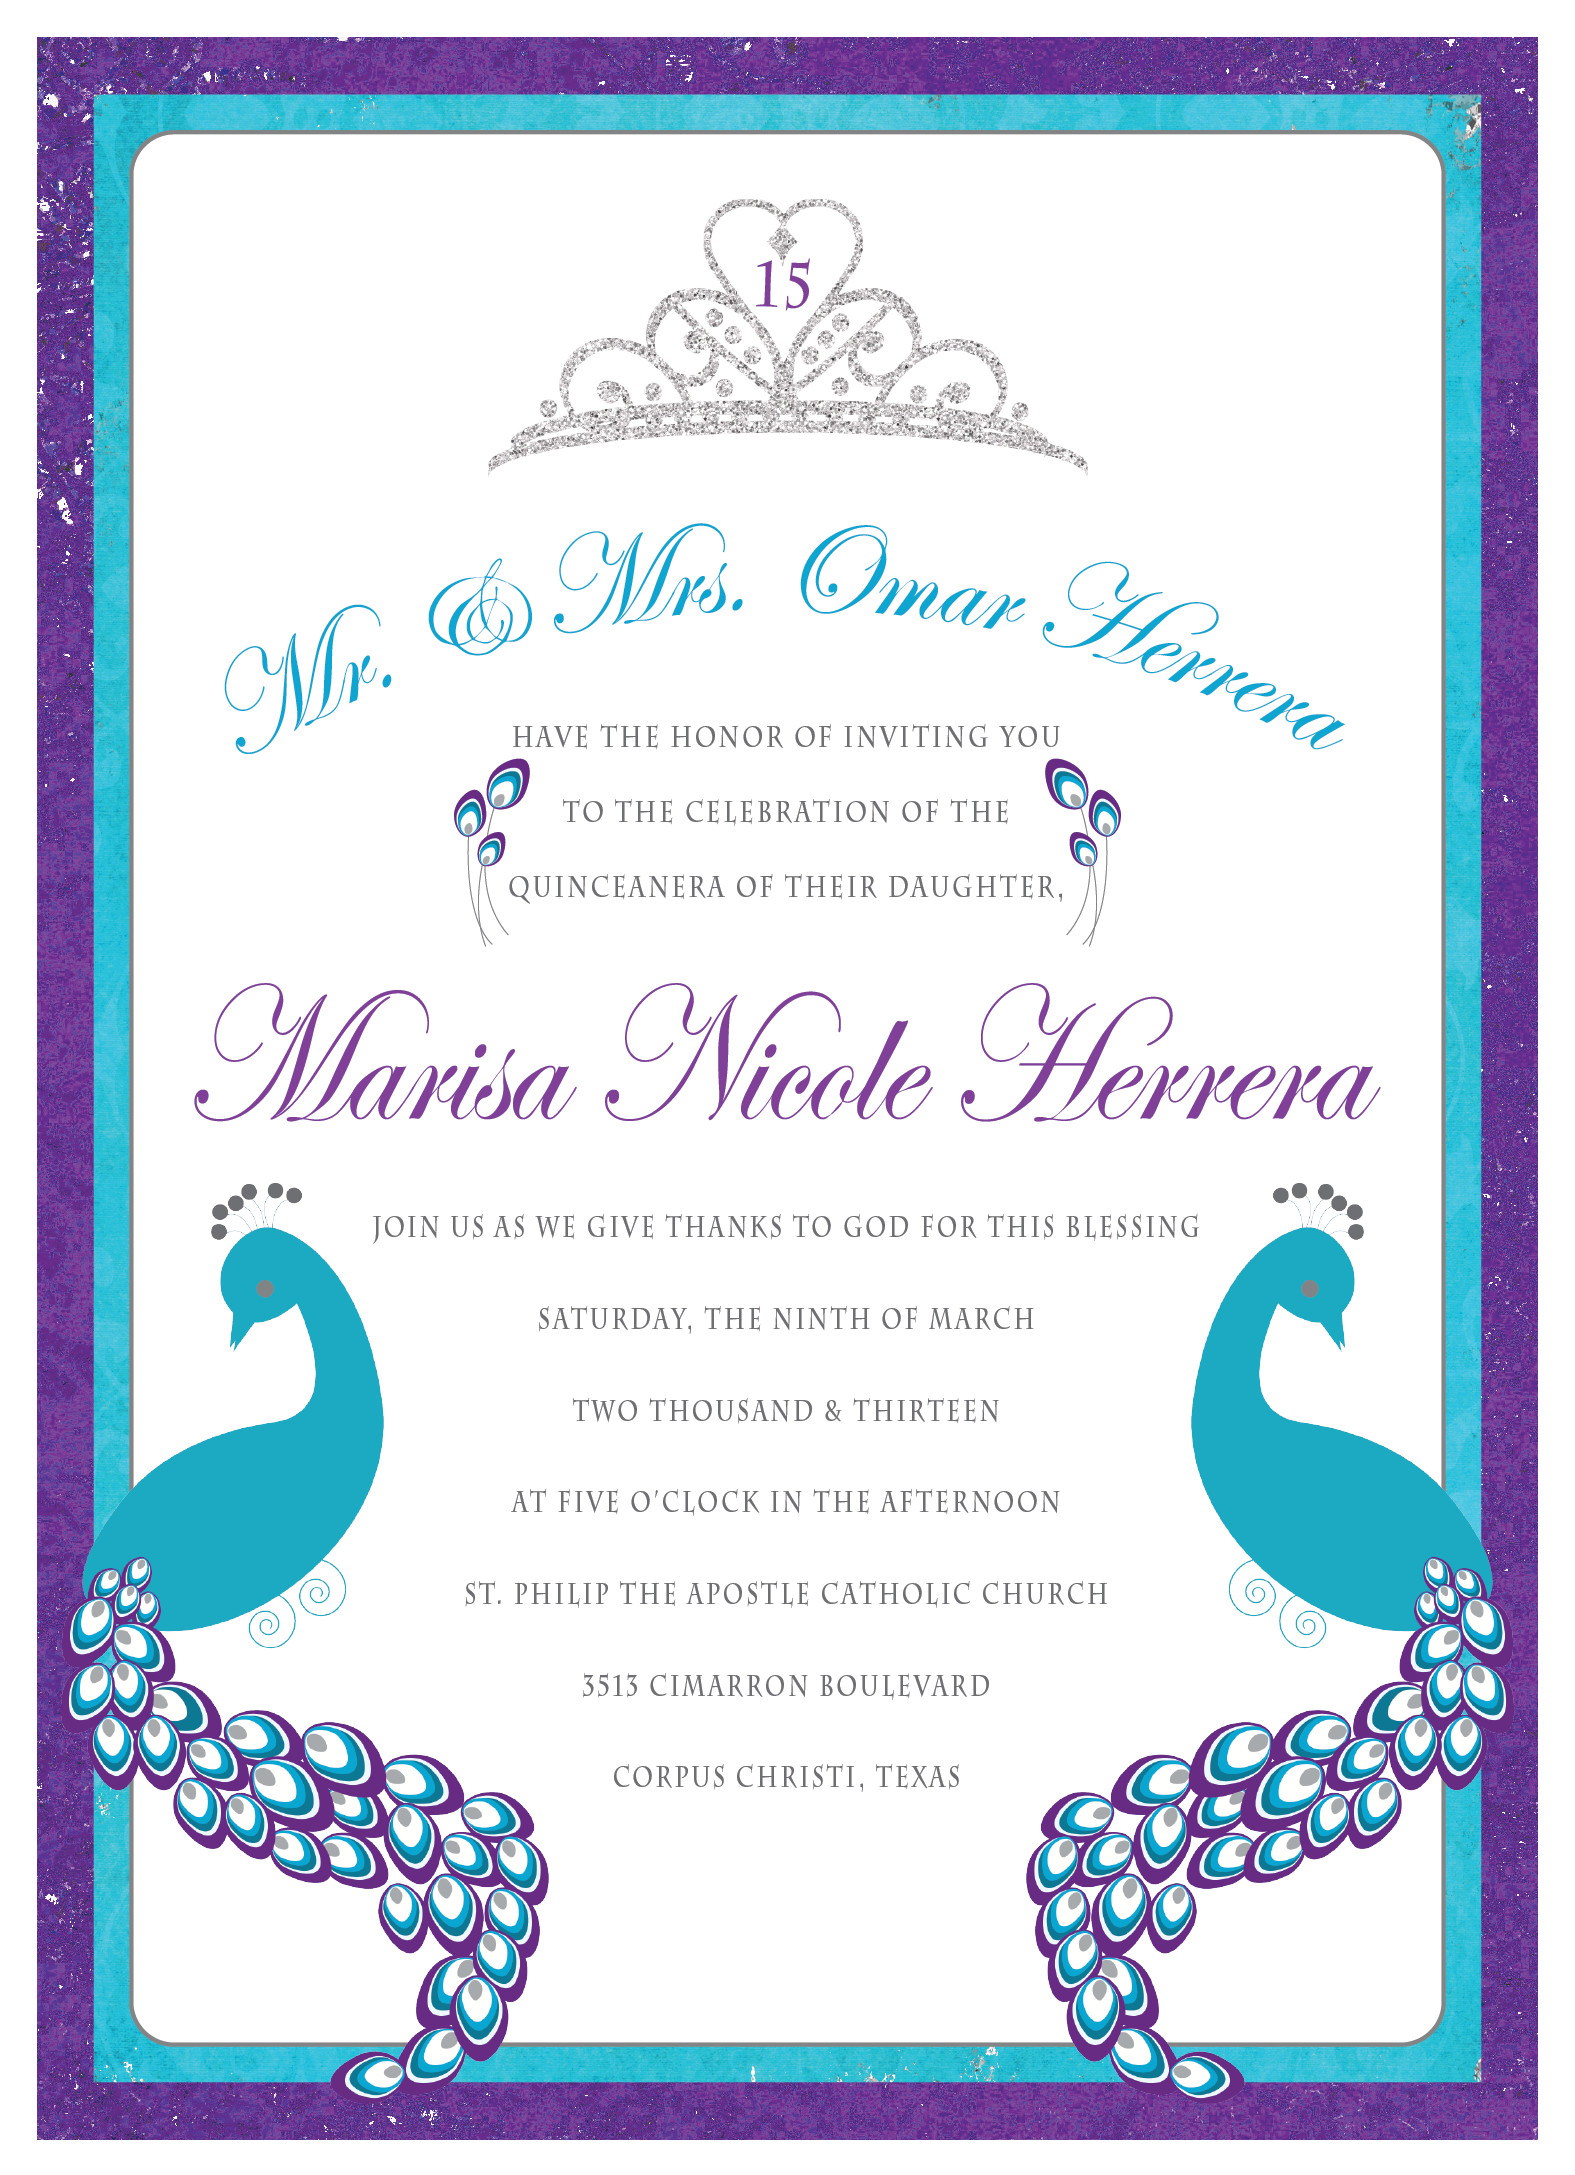 Printable Quinceanera Invitations Free From Ulyssesroom Created With - Free Printable Quinceanera Invitations